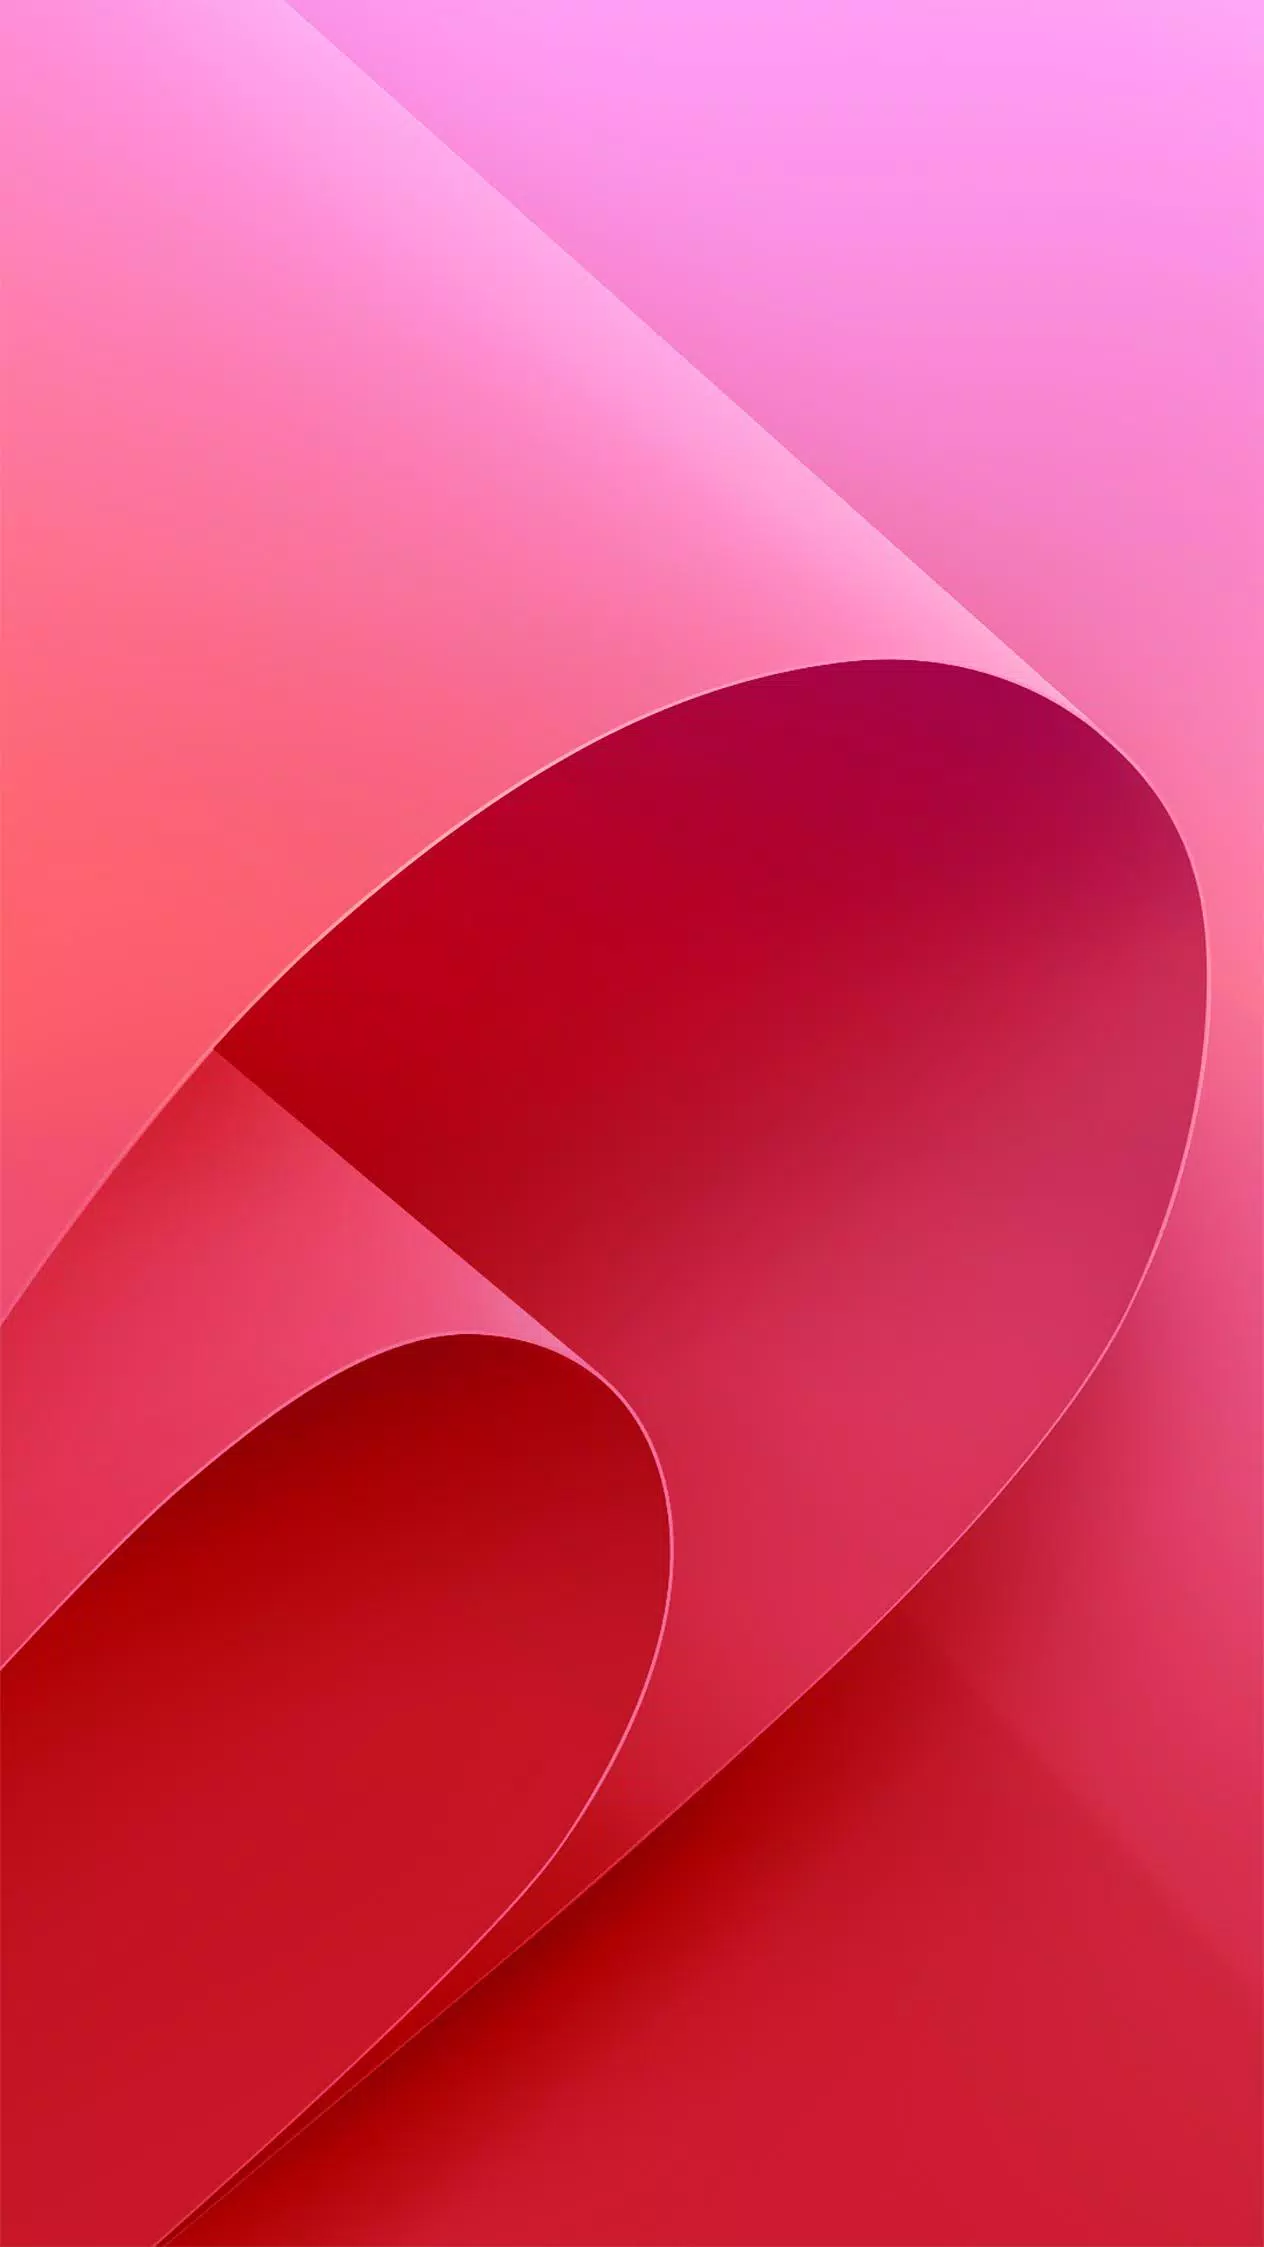 Asus Zenfone 2 3 4 Wallpaper For Android Apk Download